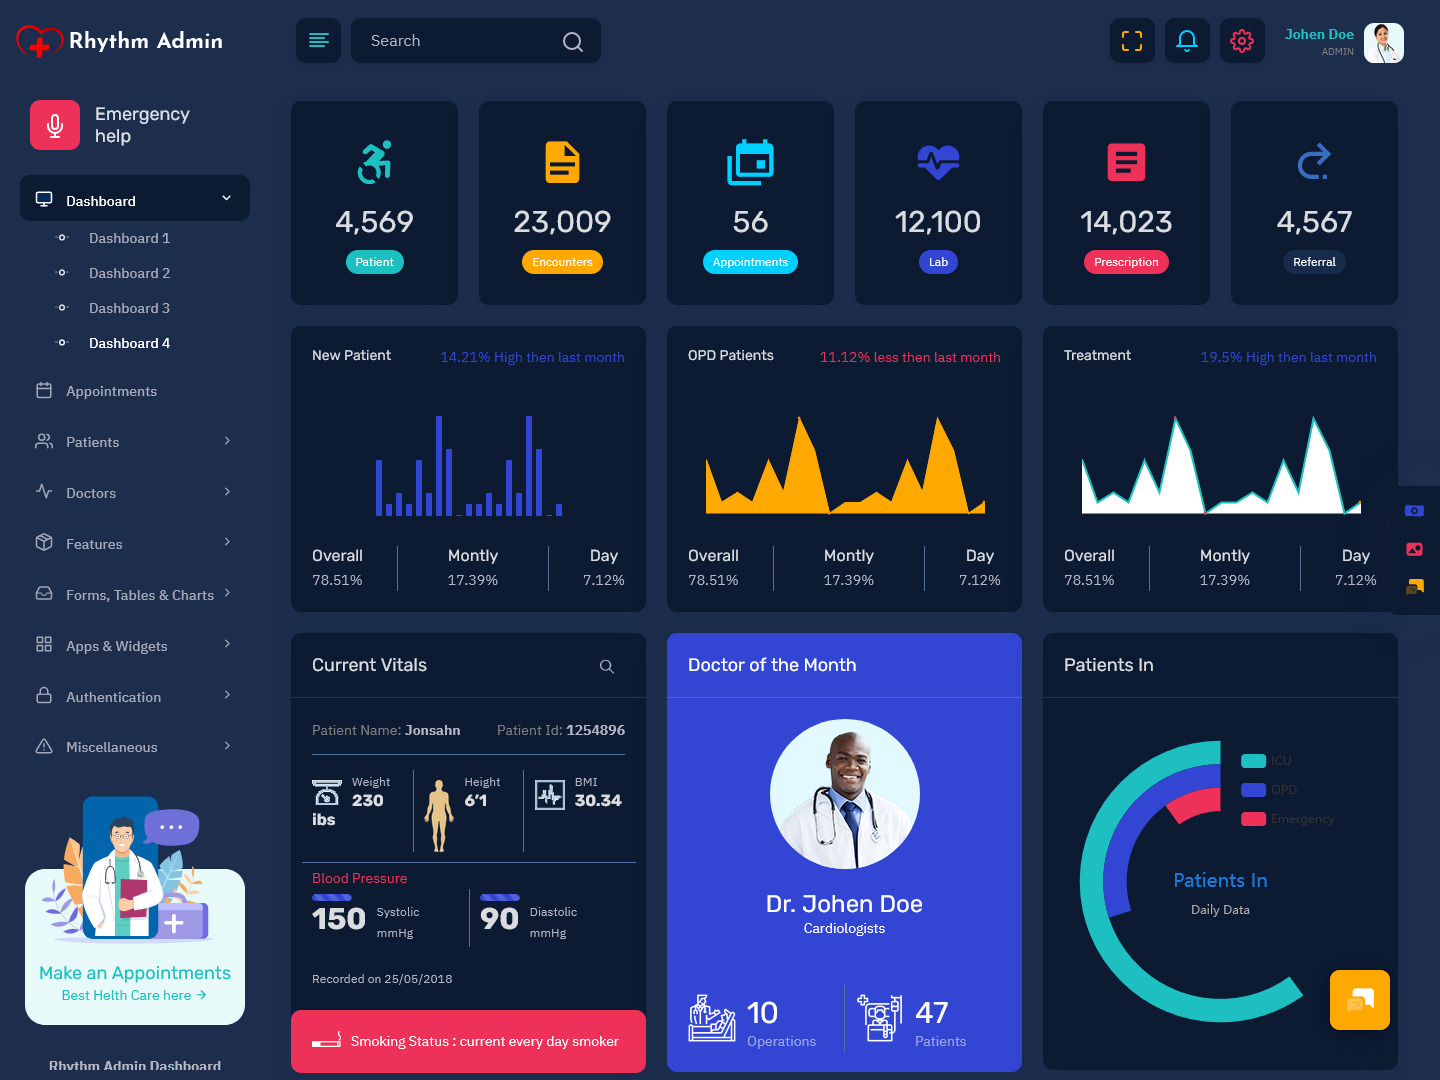 Bootstrap admin template